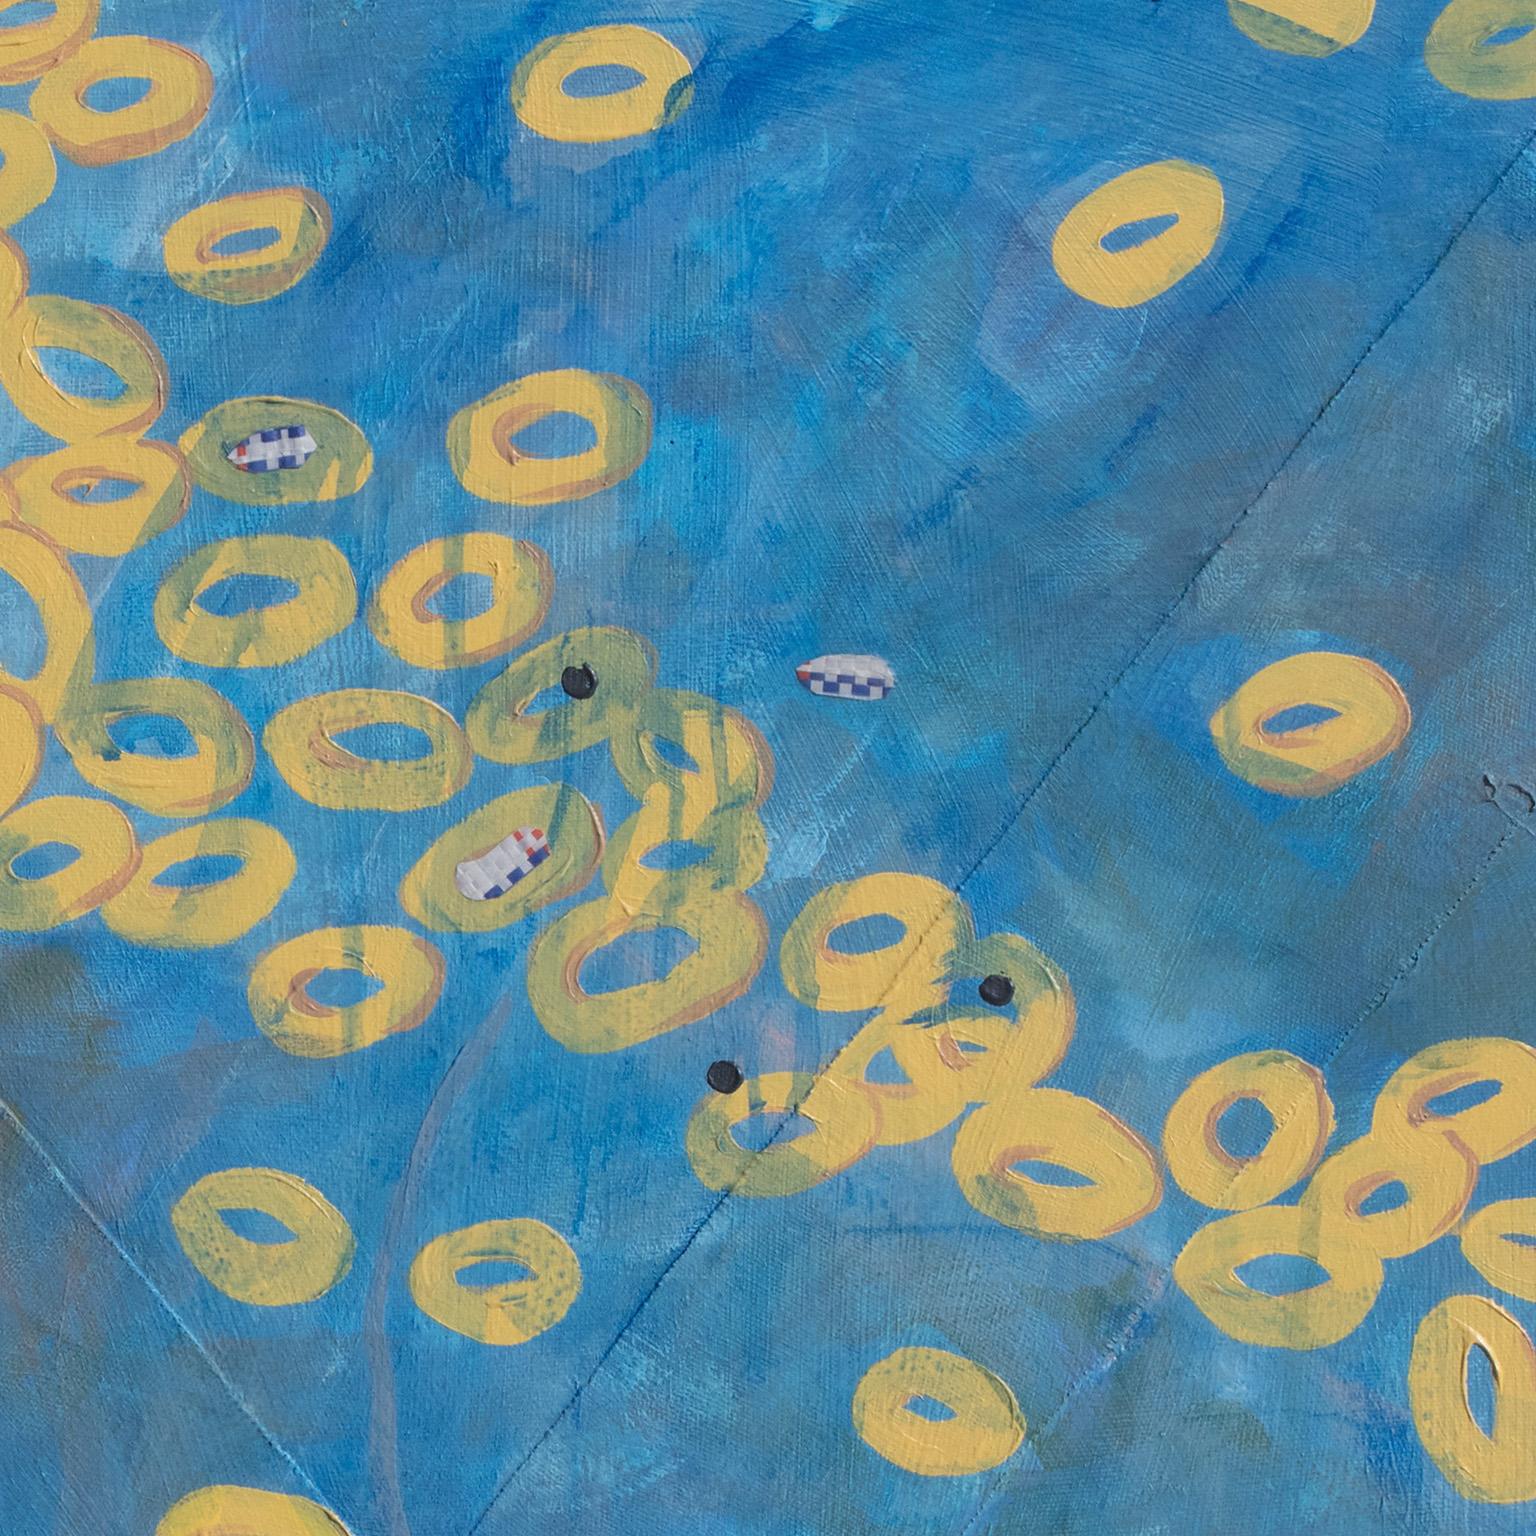 Spring Break Afternoon #3 is a 34 x 46-inch acrylic and collage work on canvas. The primary colors are yellow and blue. The image is playful, with hundreds of yellow buys floating on a blue background, pushed by the current and the wind into